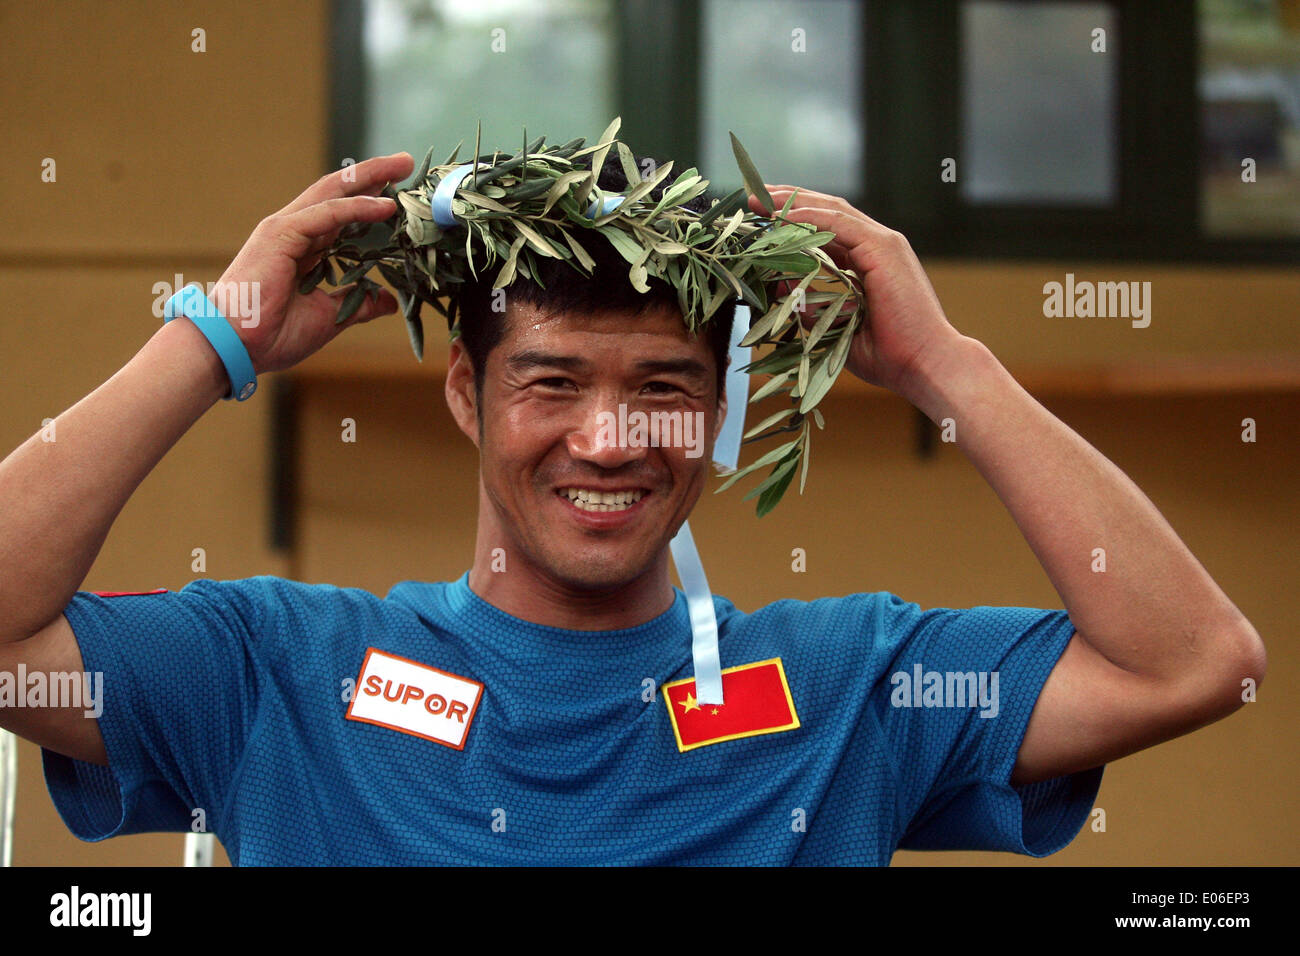 Athens, Greece. 4th May, 2014. Chinese runner Chen Penbin, who finished third at the 3rd Dolichos Ultra Marathon is awarded with an olive wreath in front of the ancient Stadium of Olympia, Greece, on May 4, 2014. A total of 26 athletes started on Friday running nonstop a 255 kilometers race from Delphi in mainland Greece to the birthplace of the Olympic Games. © Marios Lolos/Xinhua/Alamy Live News Stock Photo